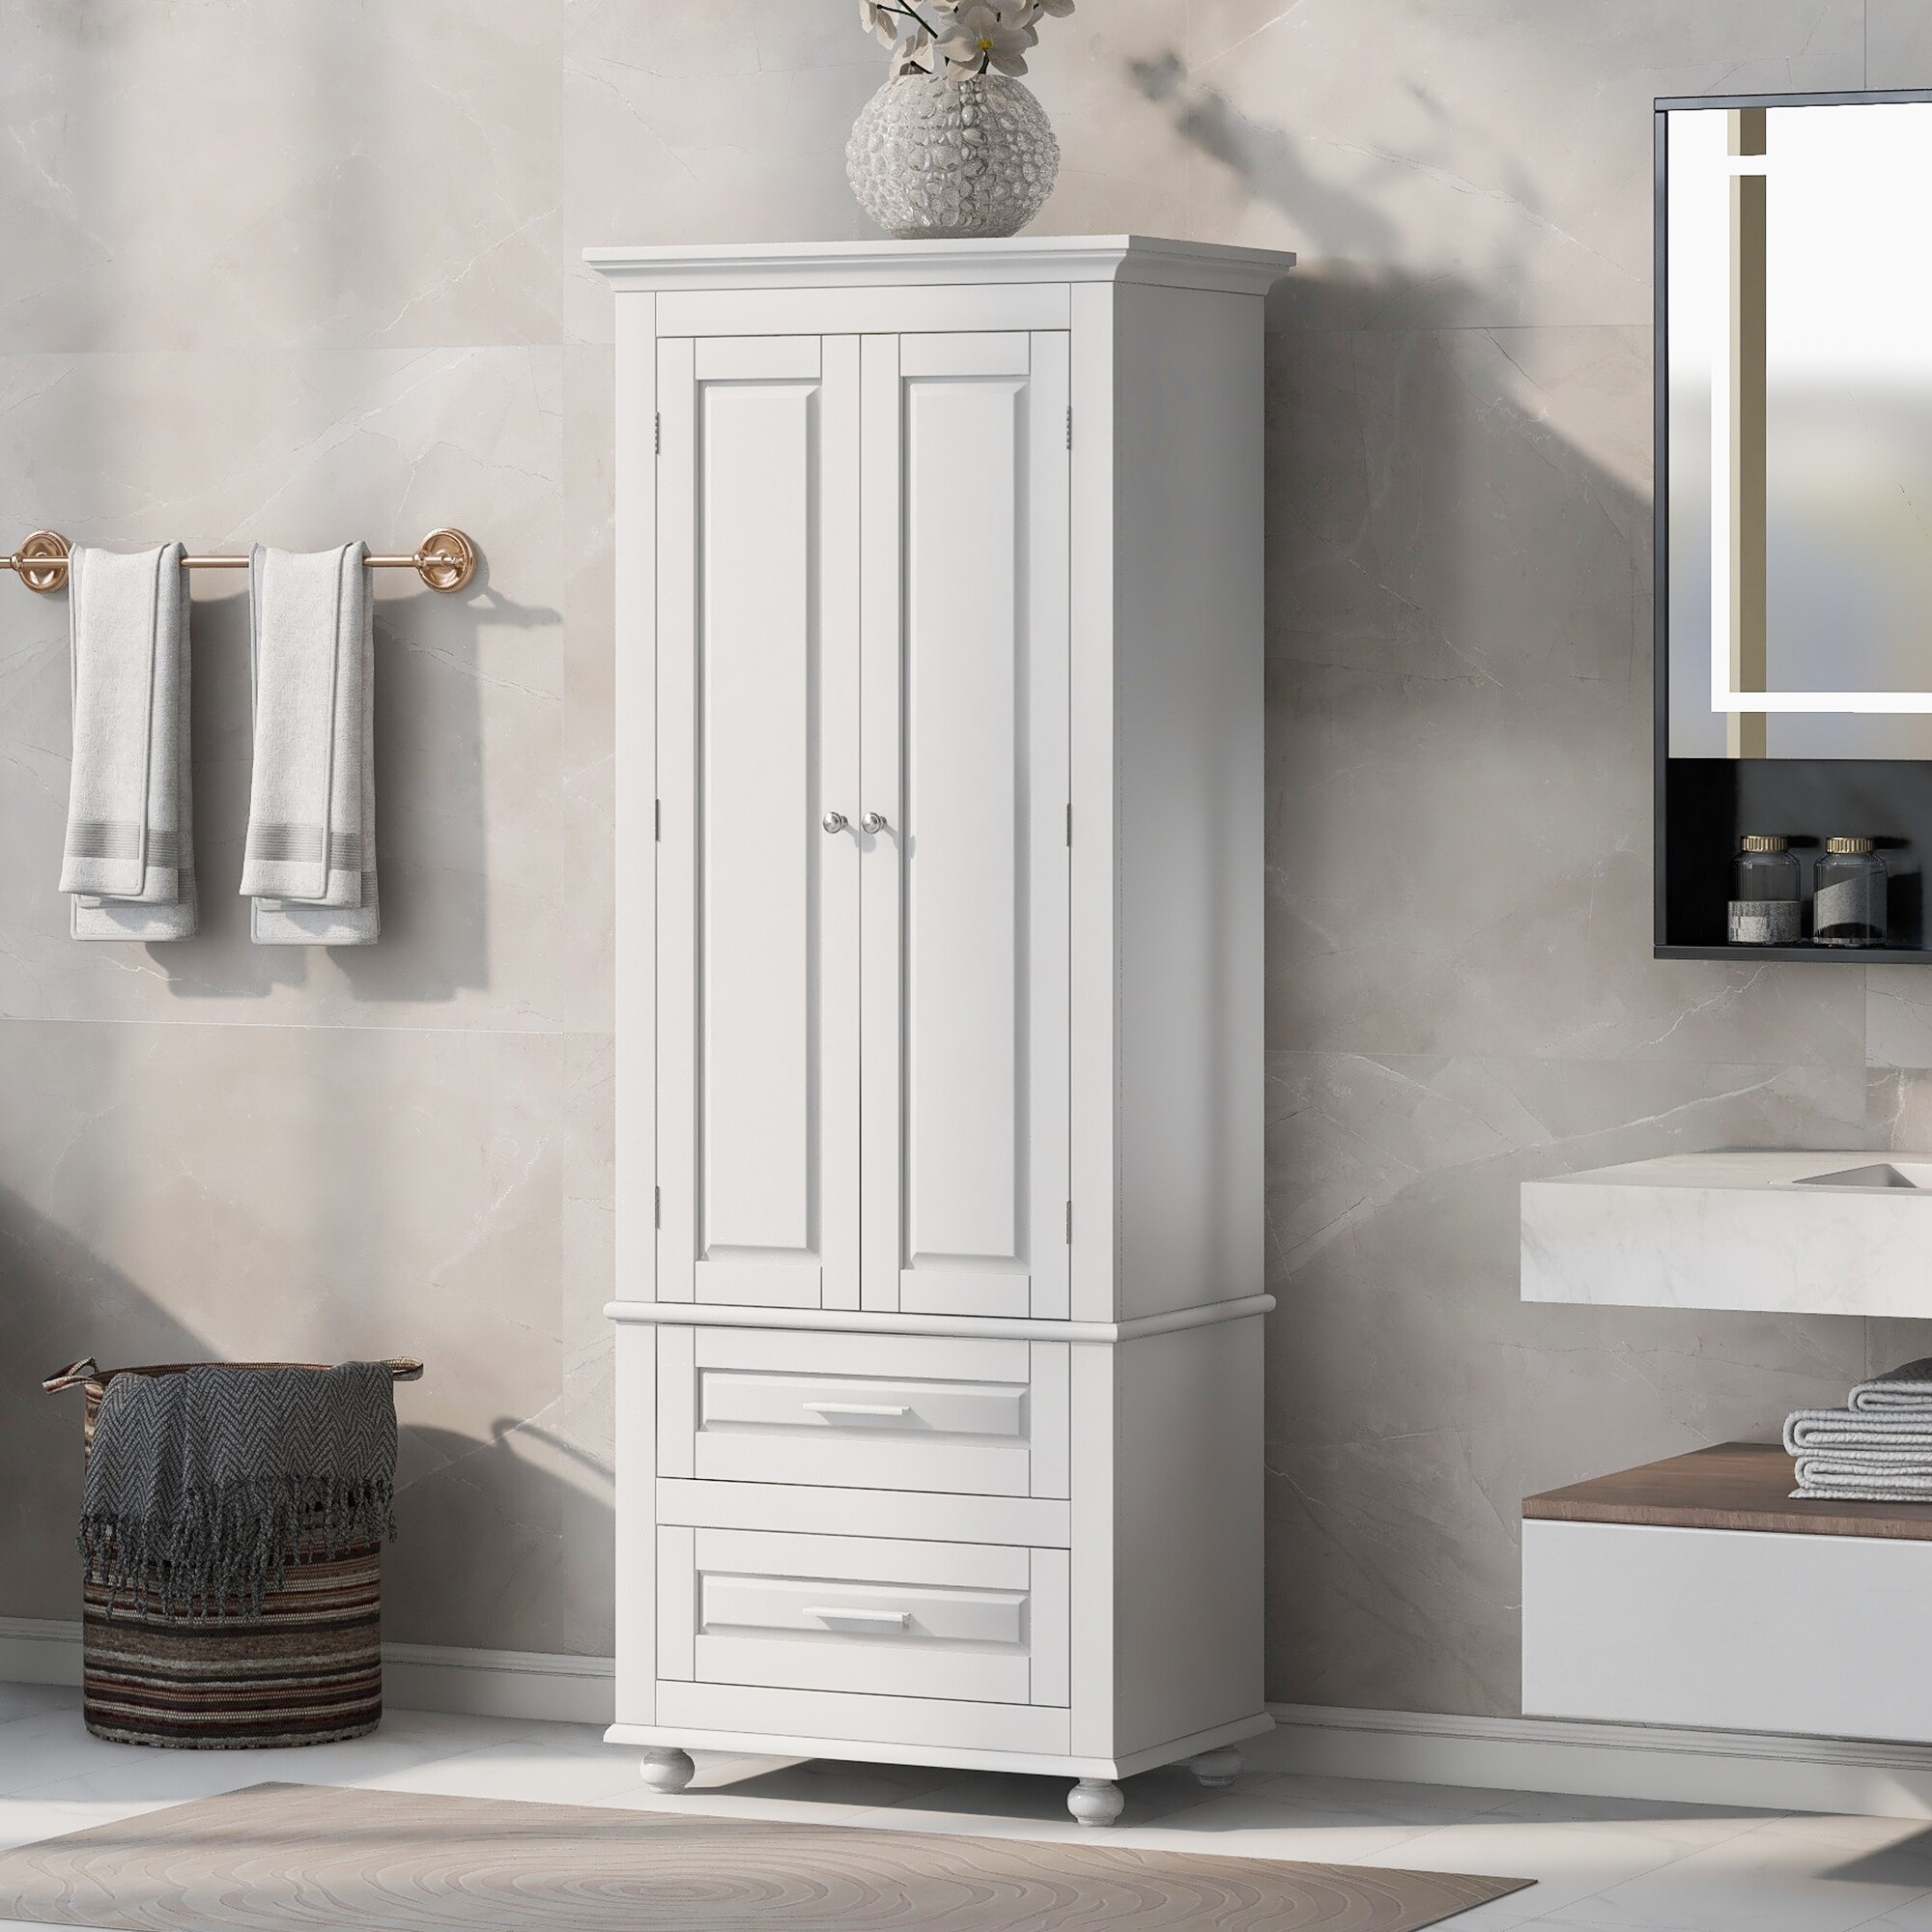 https://ak1.ostkcdn.com/images/products/is/images/direct/715d29a6cda3b8c2597553f0241adfe3915a4939/Tall-Storage-Cabinet-with-Two-Drawers-for-Bathroom-Office%2C-White.jpg